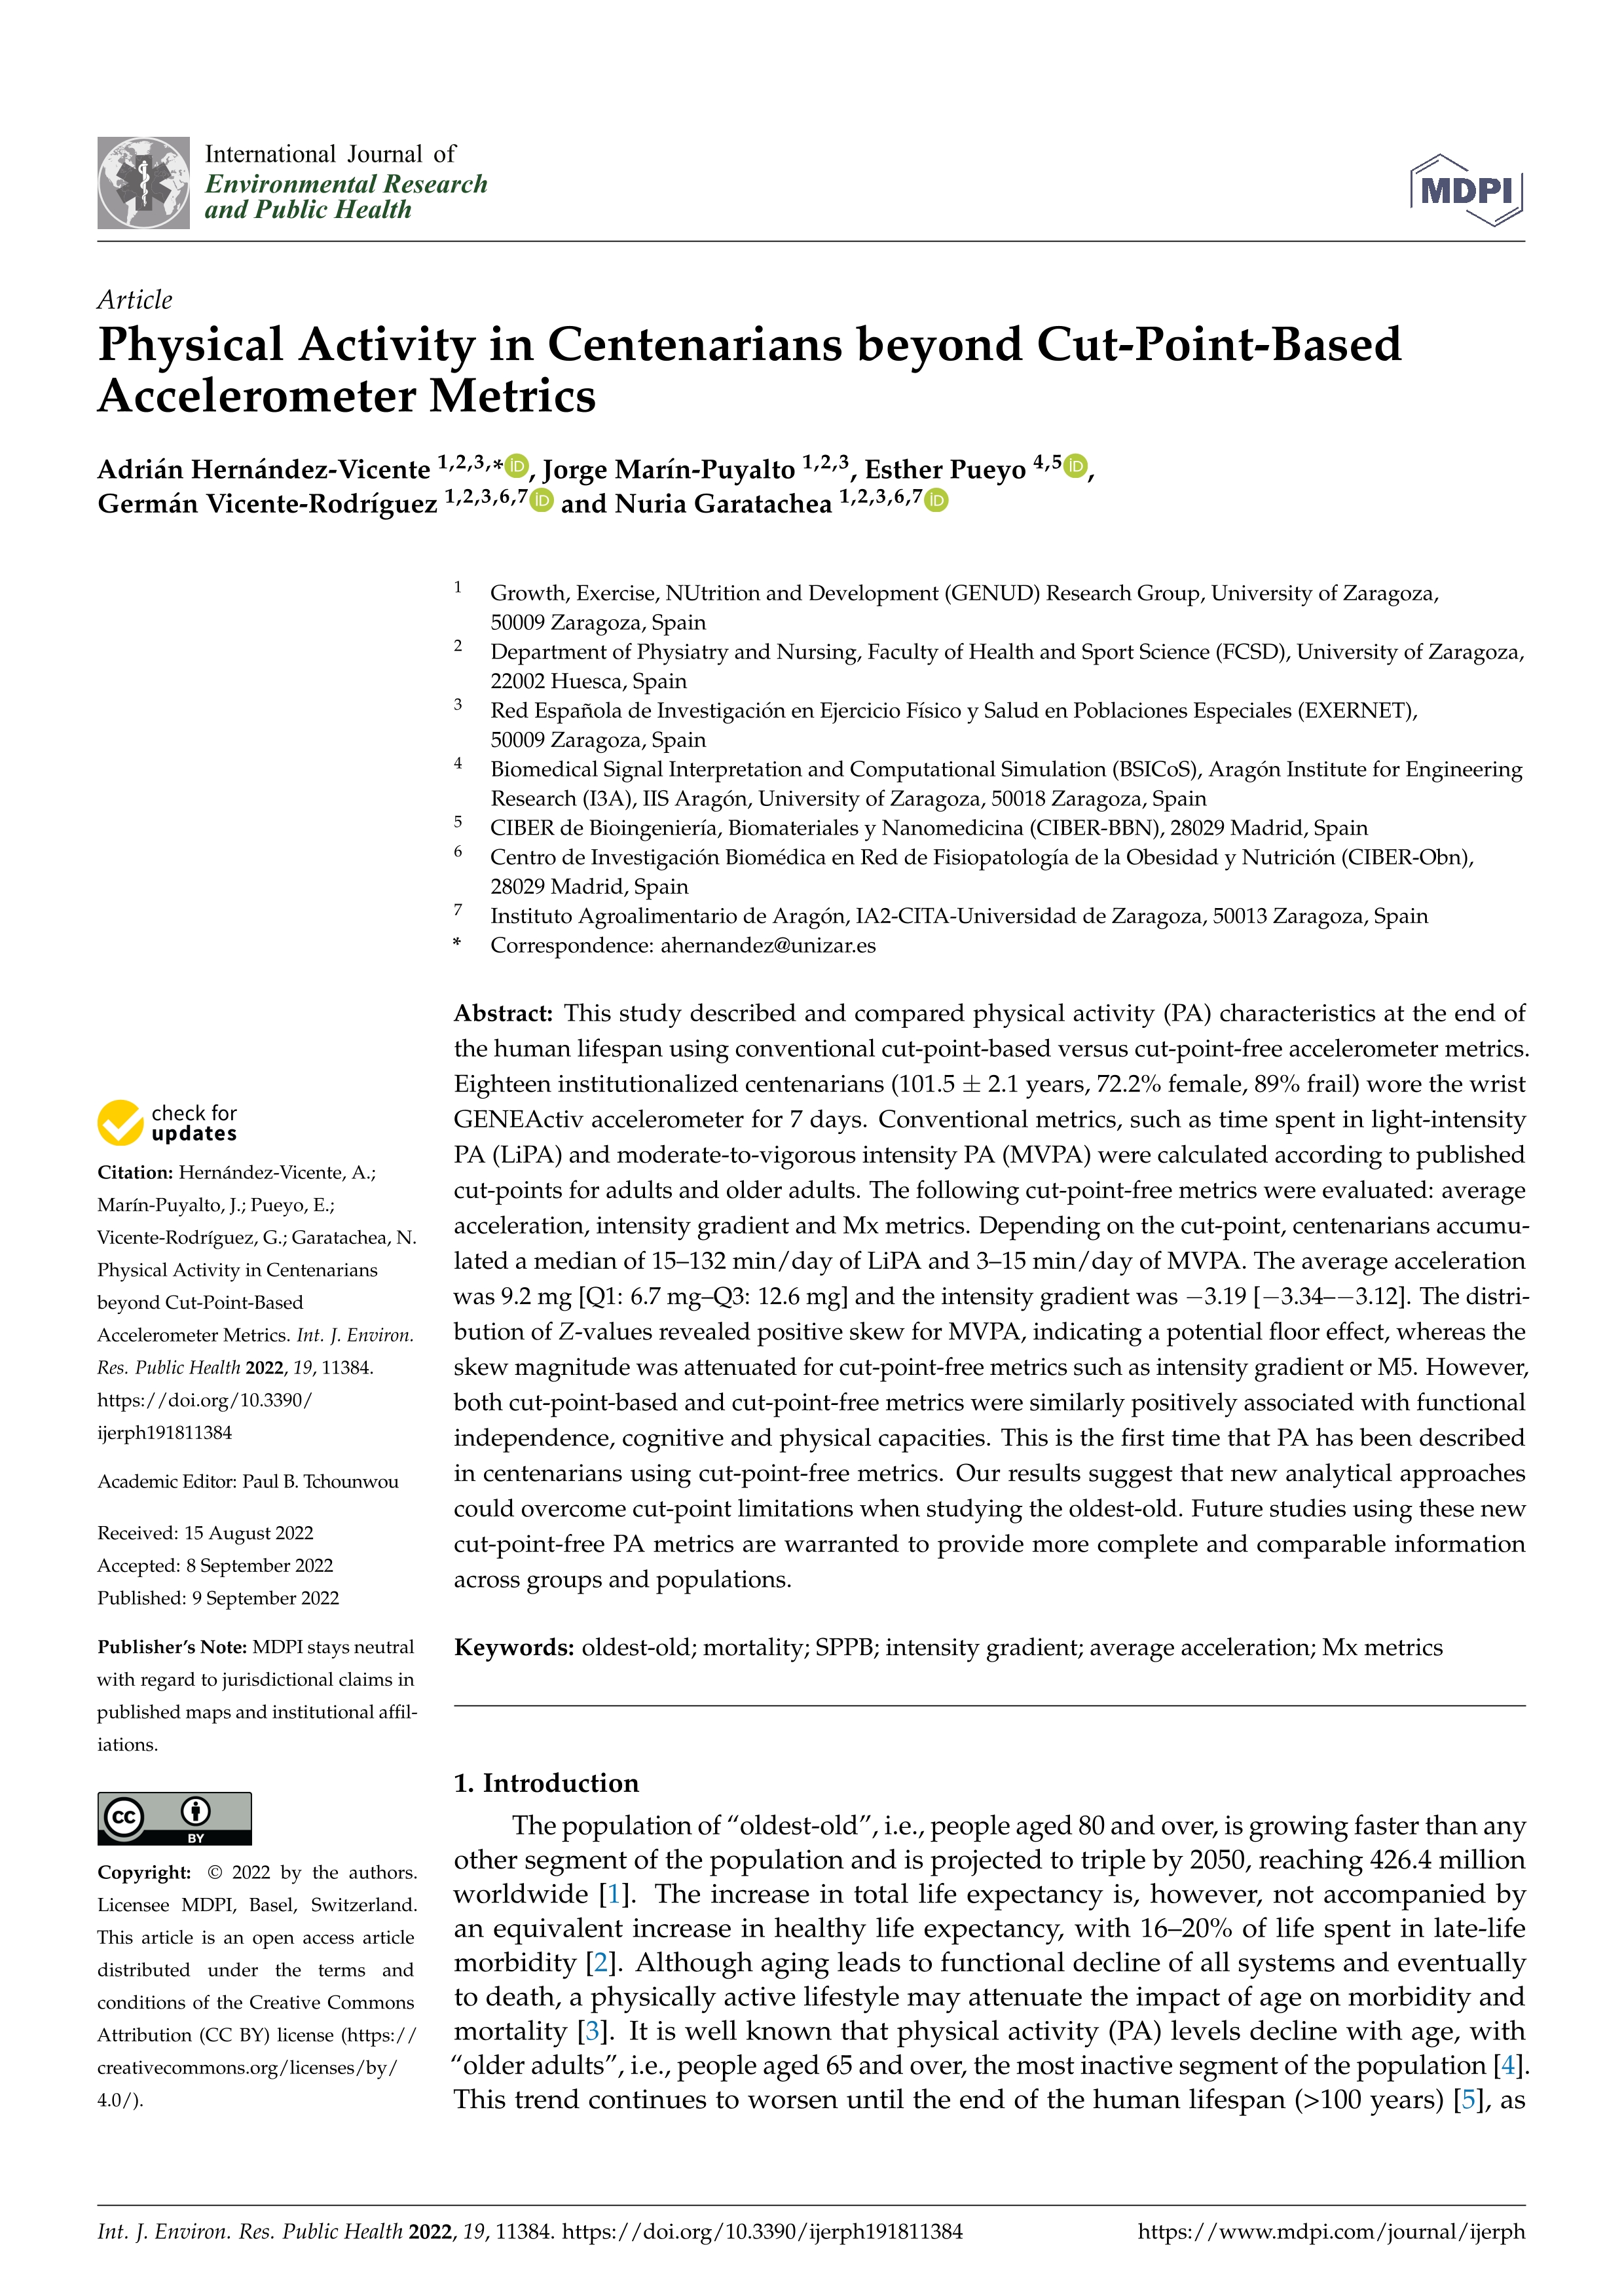 Physical activity in centenarians beyond cut-point-based accelerometer metrics